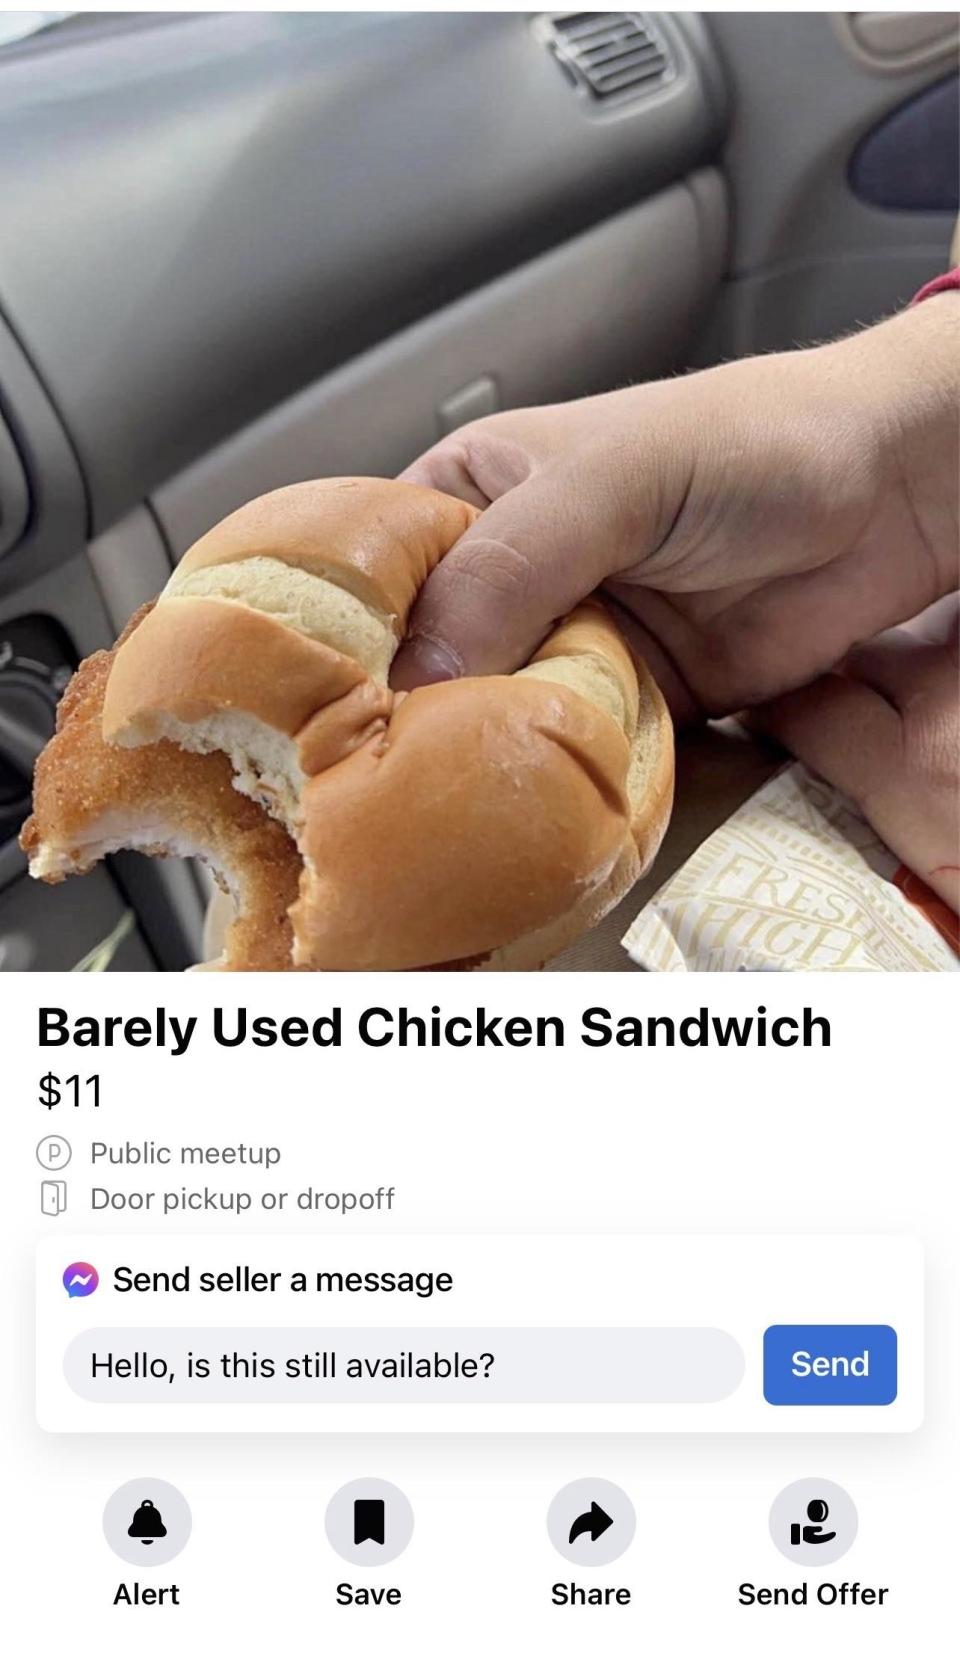 Hand holding a partially eaten sandwich, shown in a car, with a sales listing for "Barely Used Chicken Sandwich" at $11